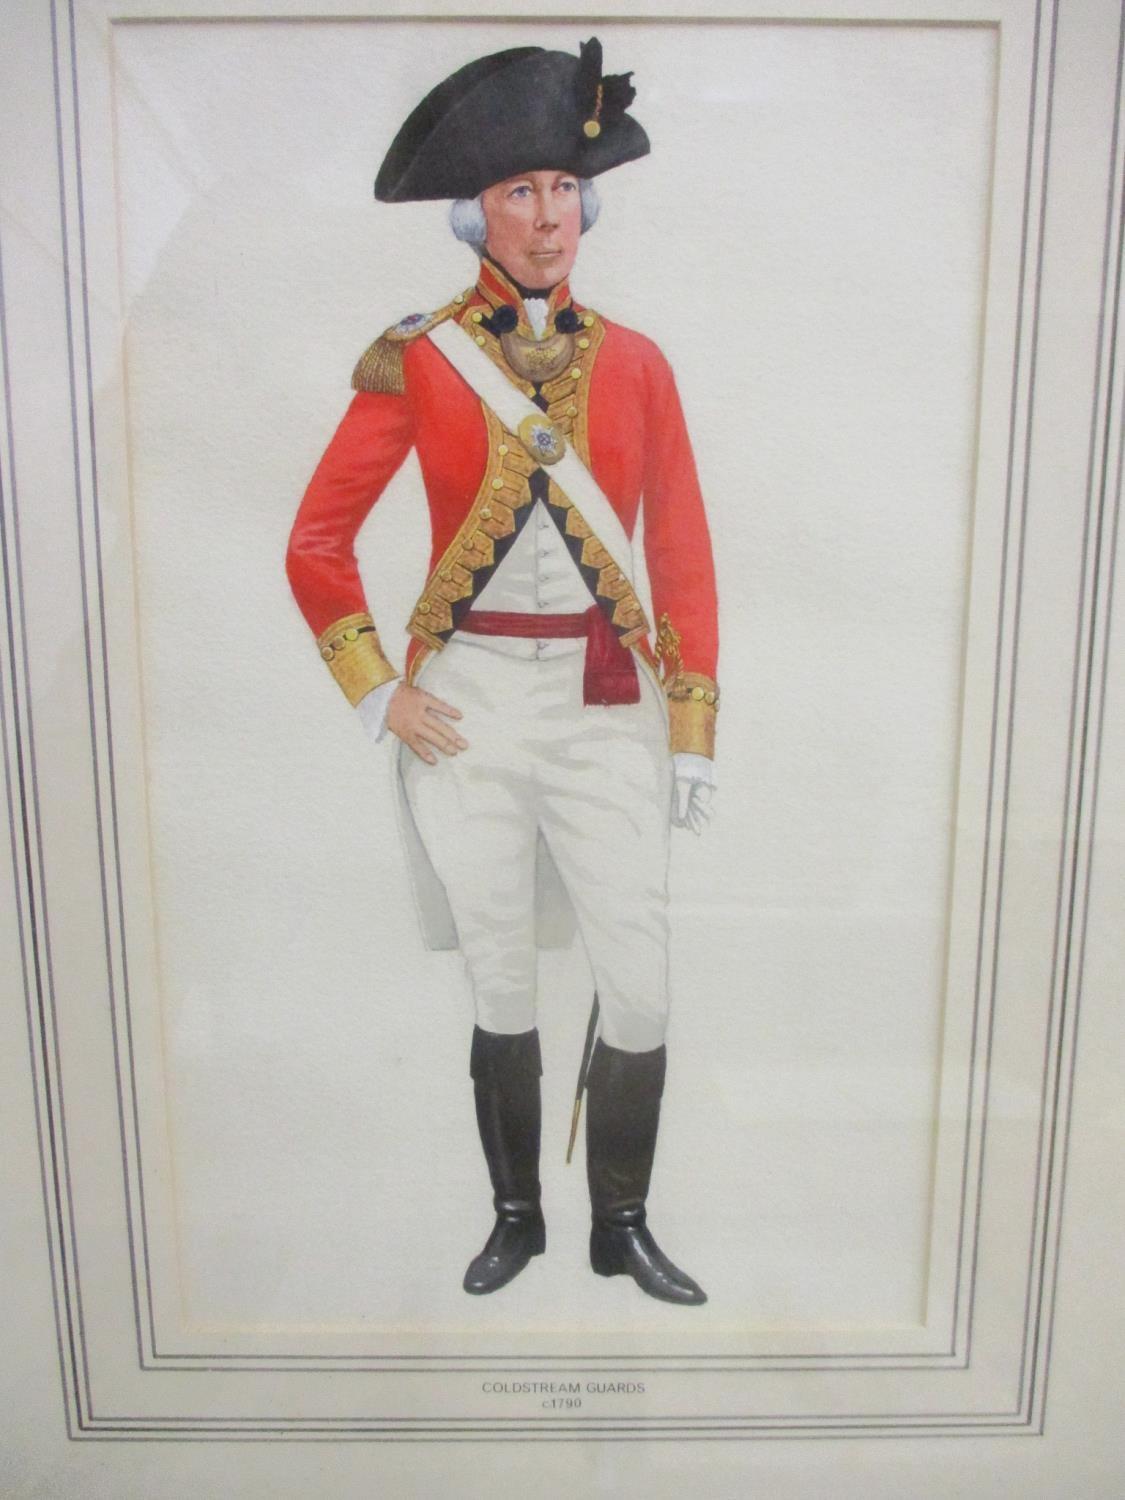 Five watercolours depicting British soldiers in uniforms, through the ages, 1790-1969 - Image 6 of 6